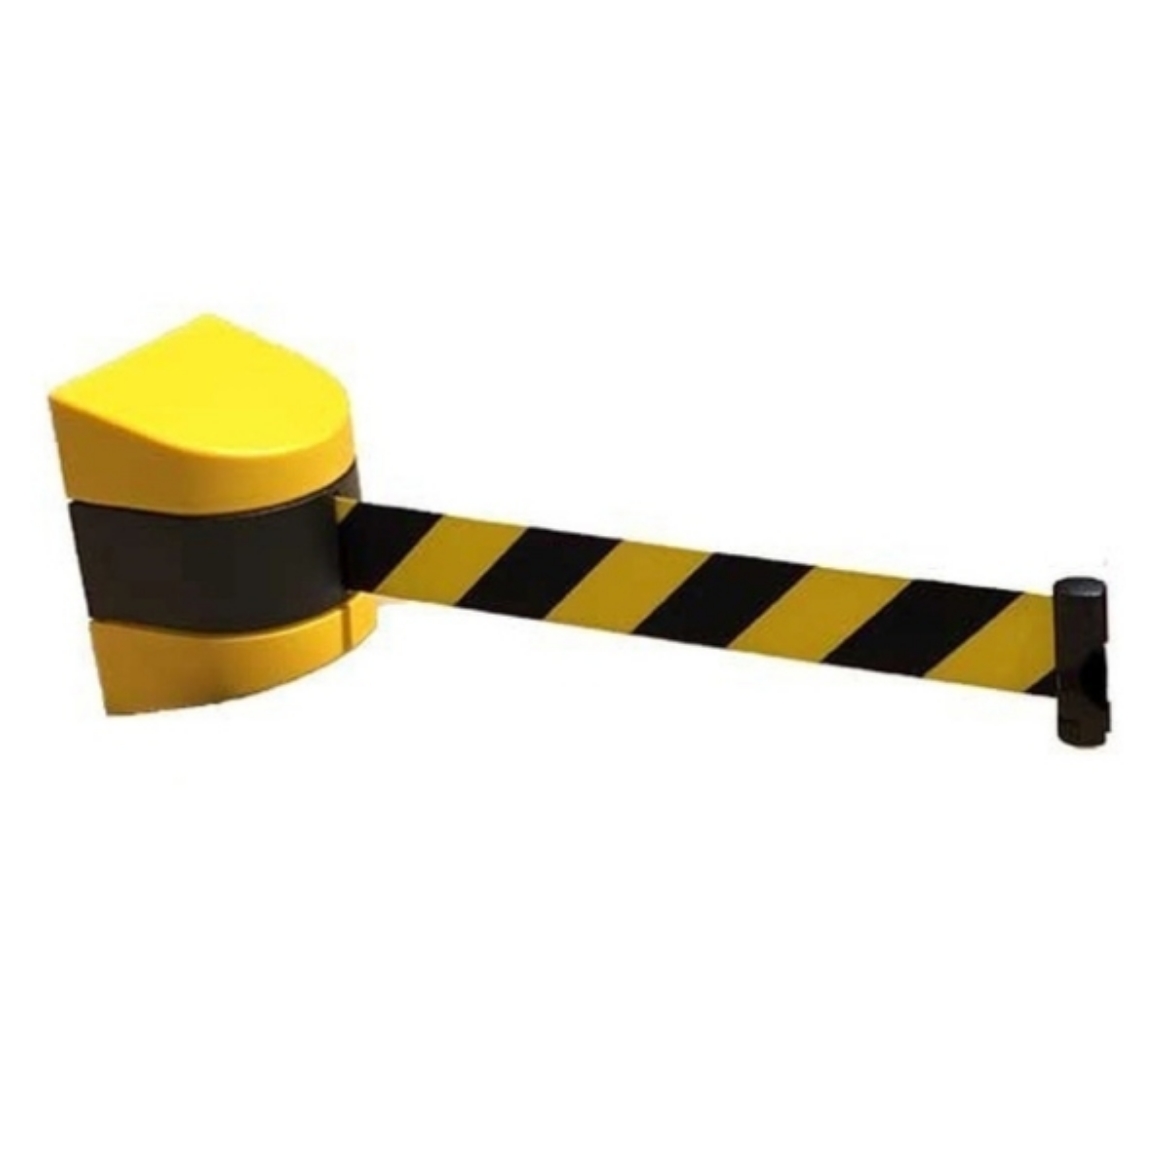 Picture of WALL MOUNTED RETRACTABLE SAFETY BARRIER - 9M. BLACK/YELLOW